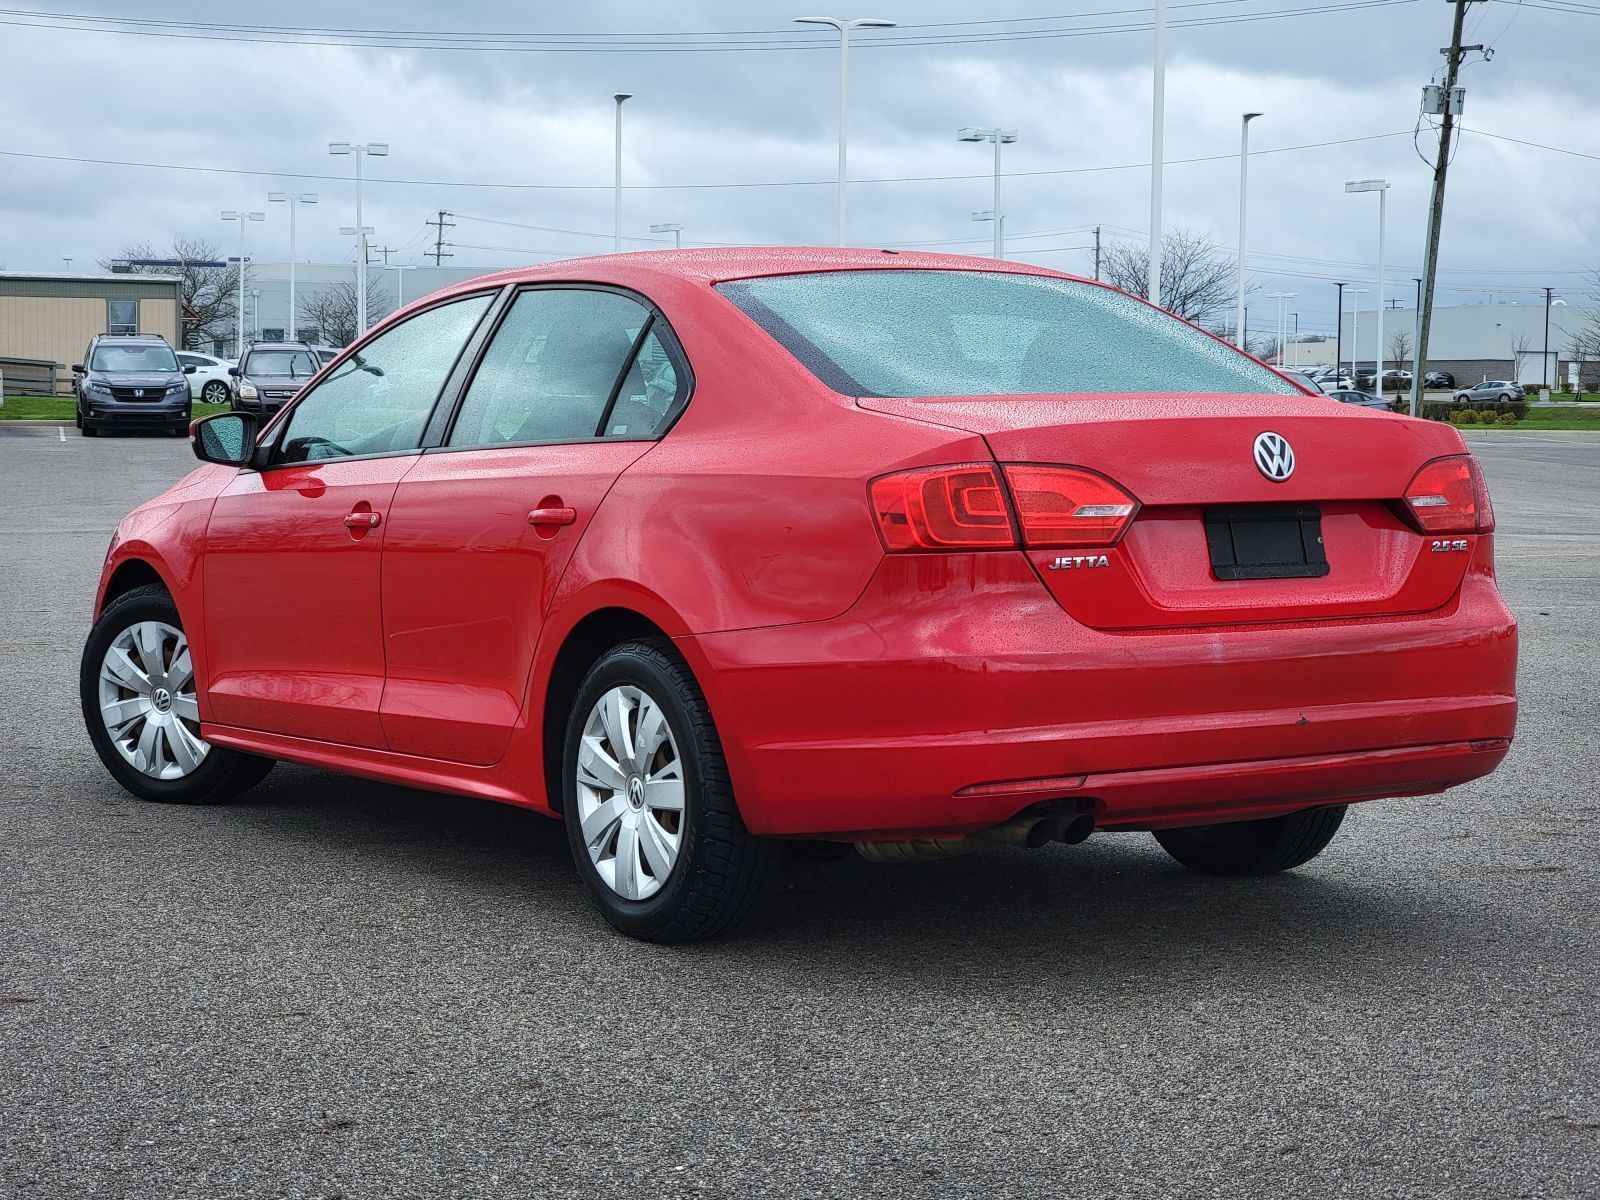 Used, 2012 Volkswagen Jetta 2.5L SE, Red, G0251A-10